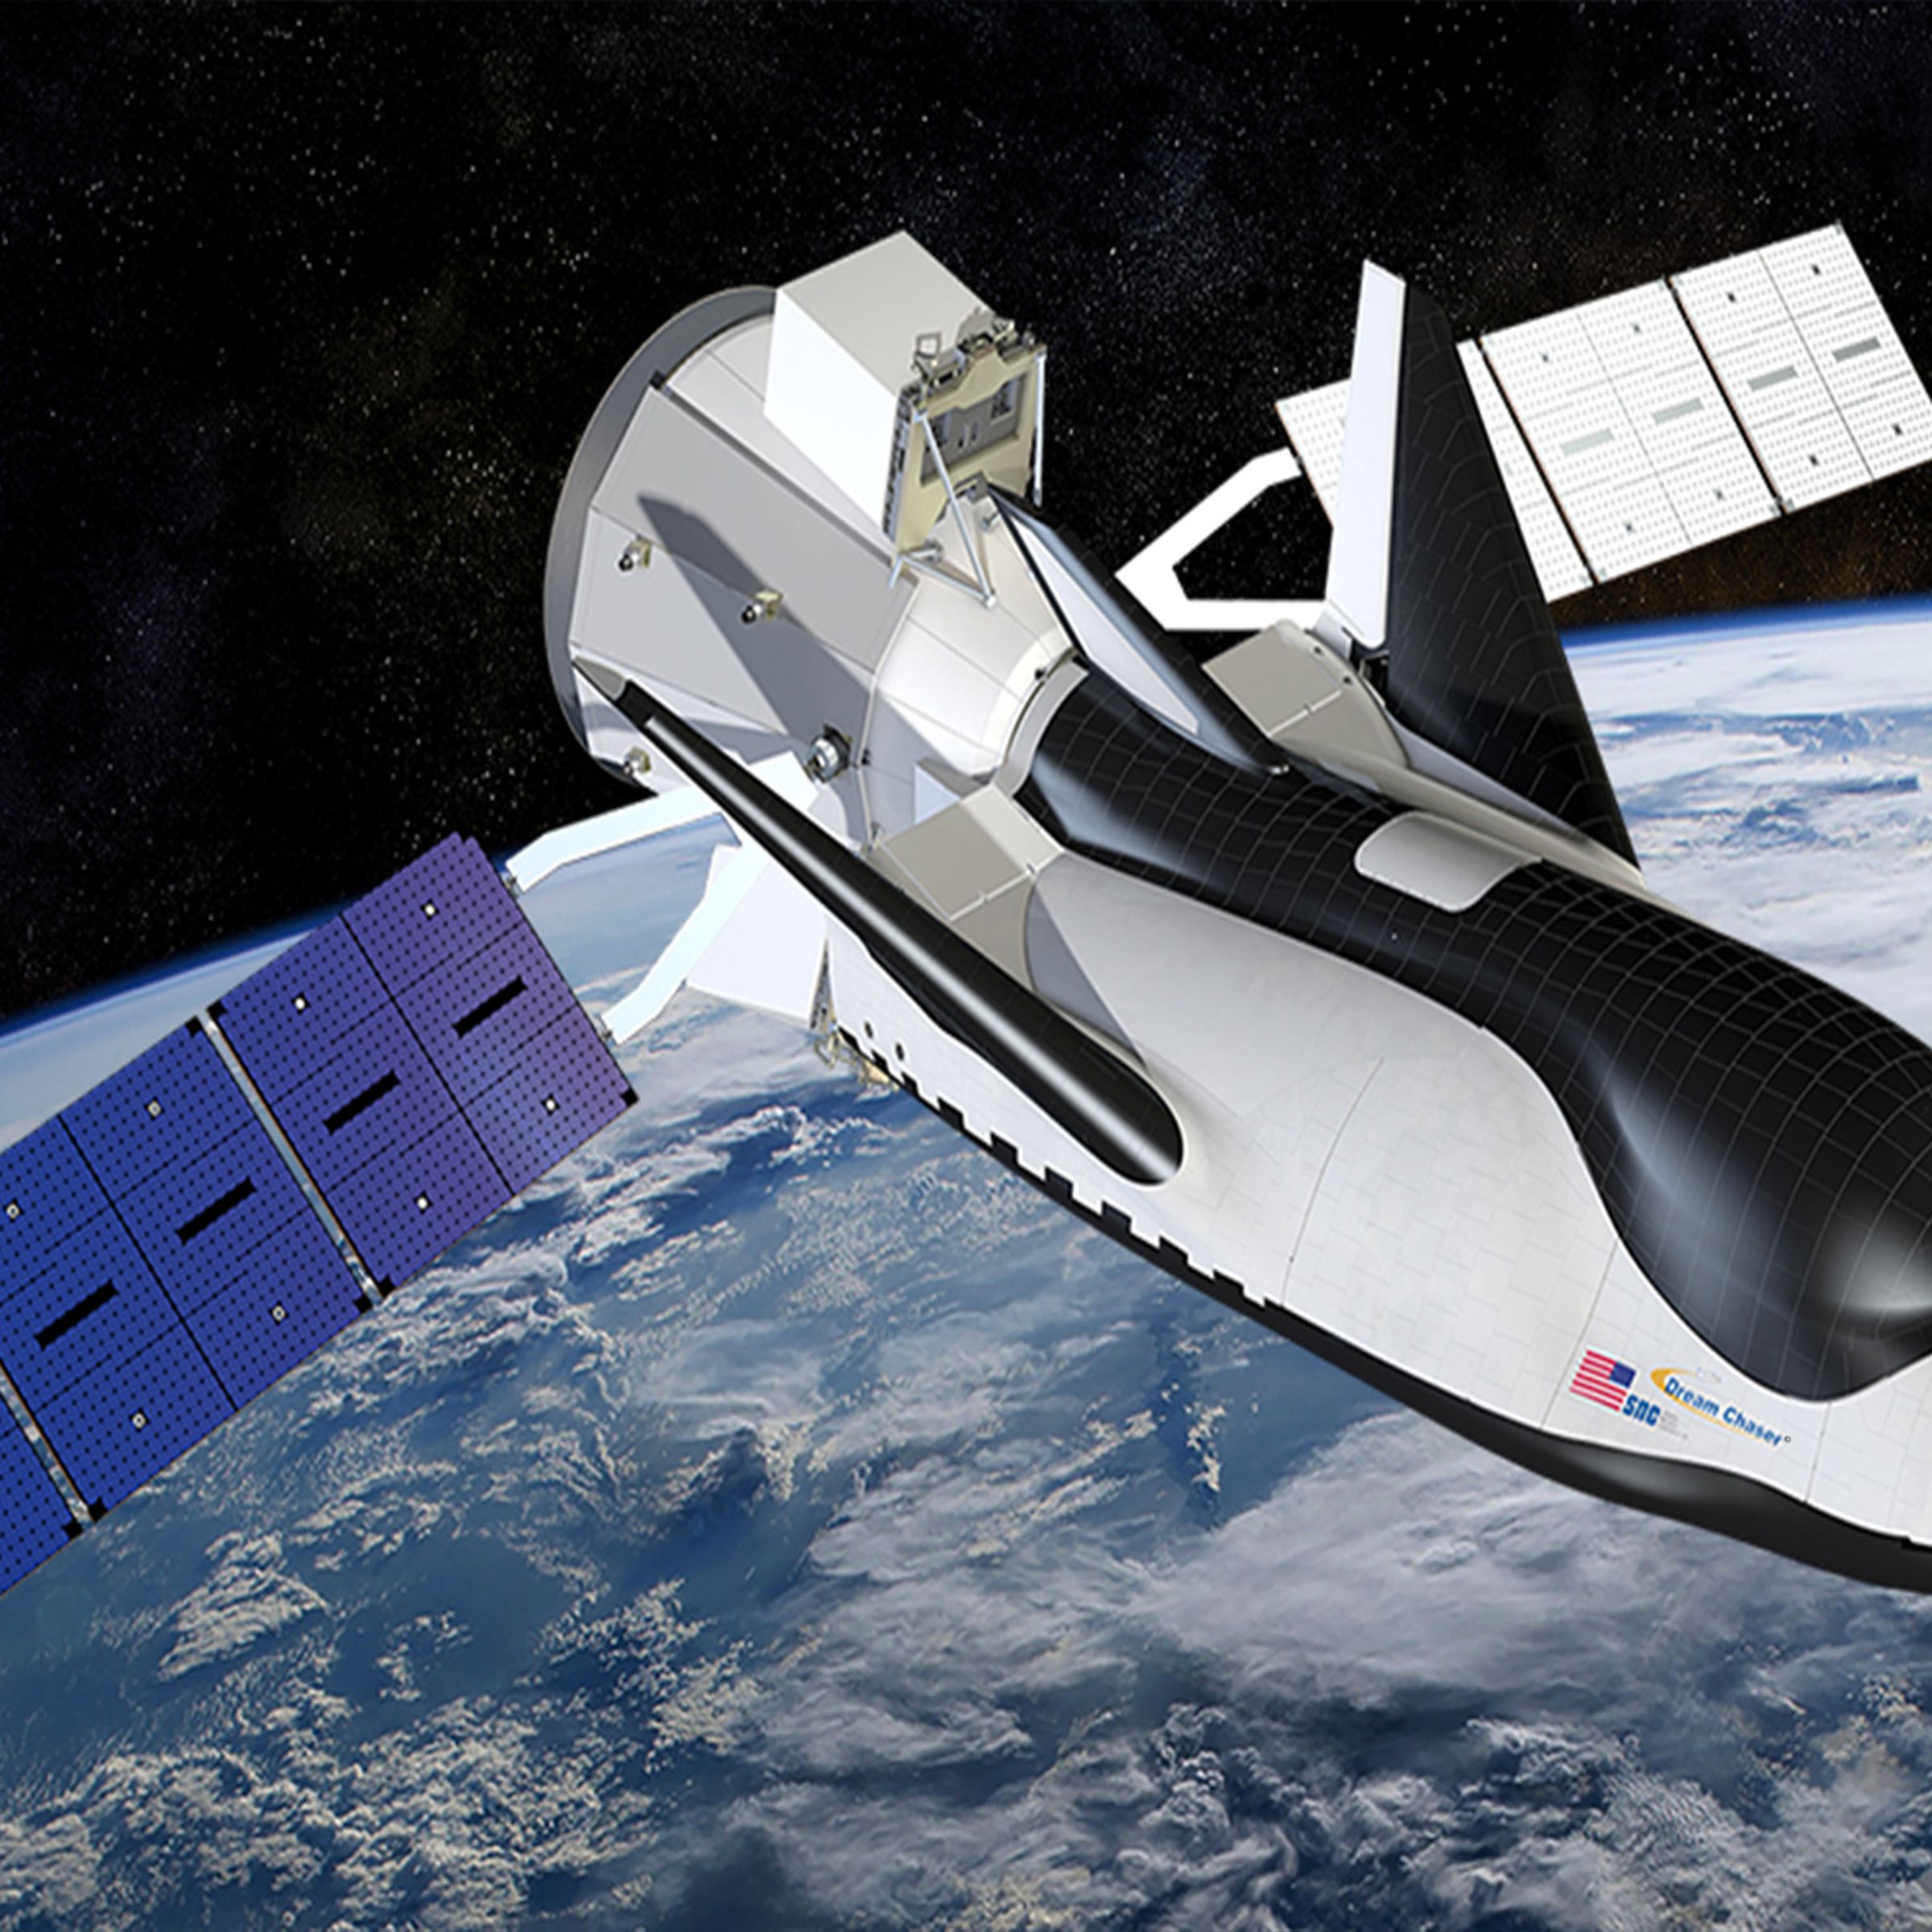 A rendering of SNC’s Dream Chaser vehicle in space